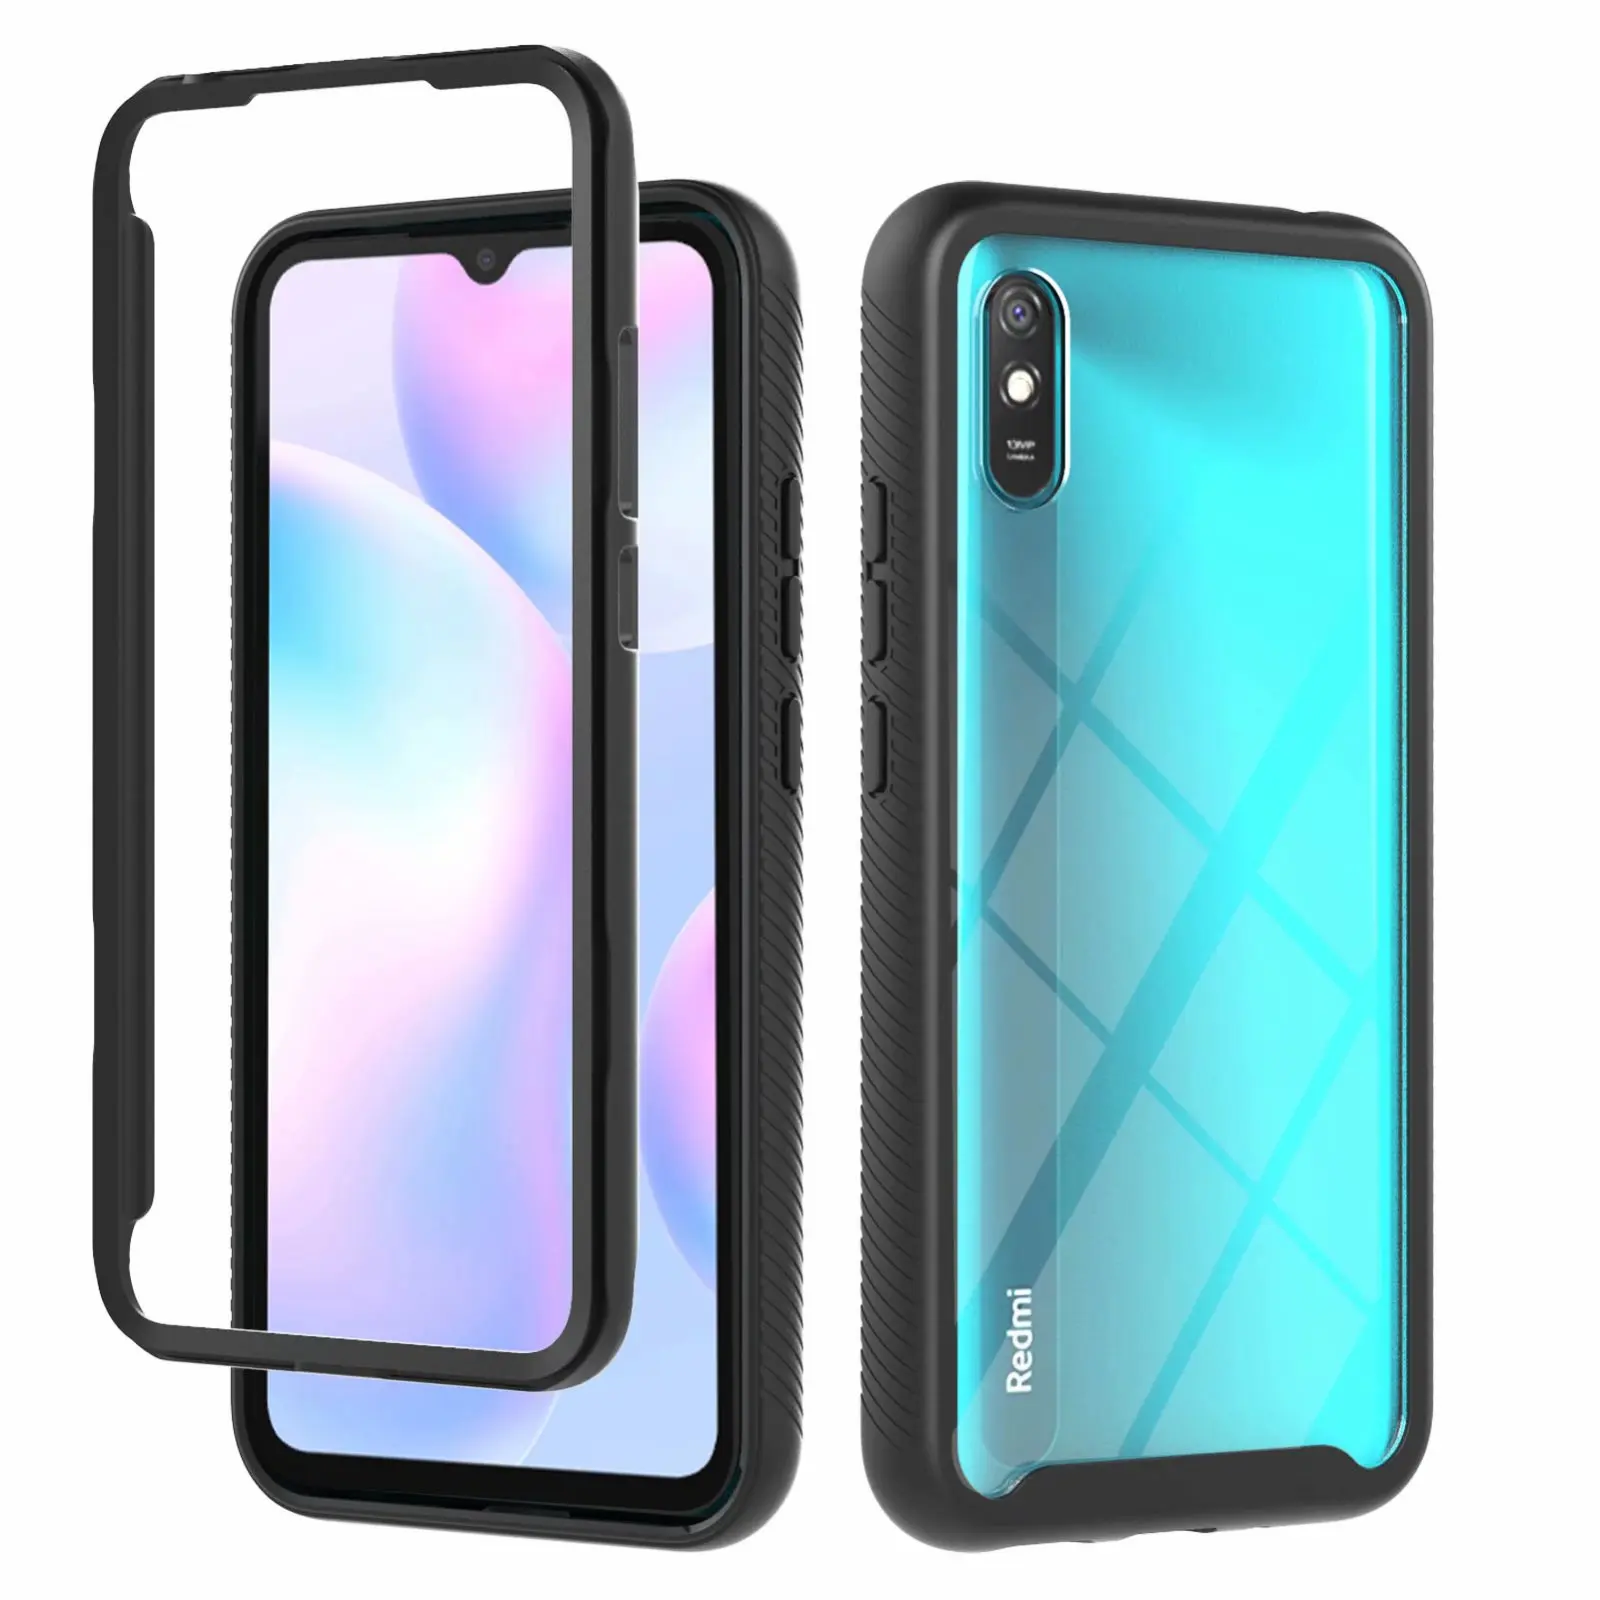 

Phone Accessories shockproof Protection Phone Case For Redmi K40 K20 9T 9a 9c Note 10 9 8 7 pro Max Cover shell, 3 colors